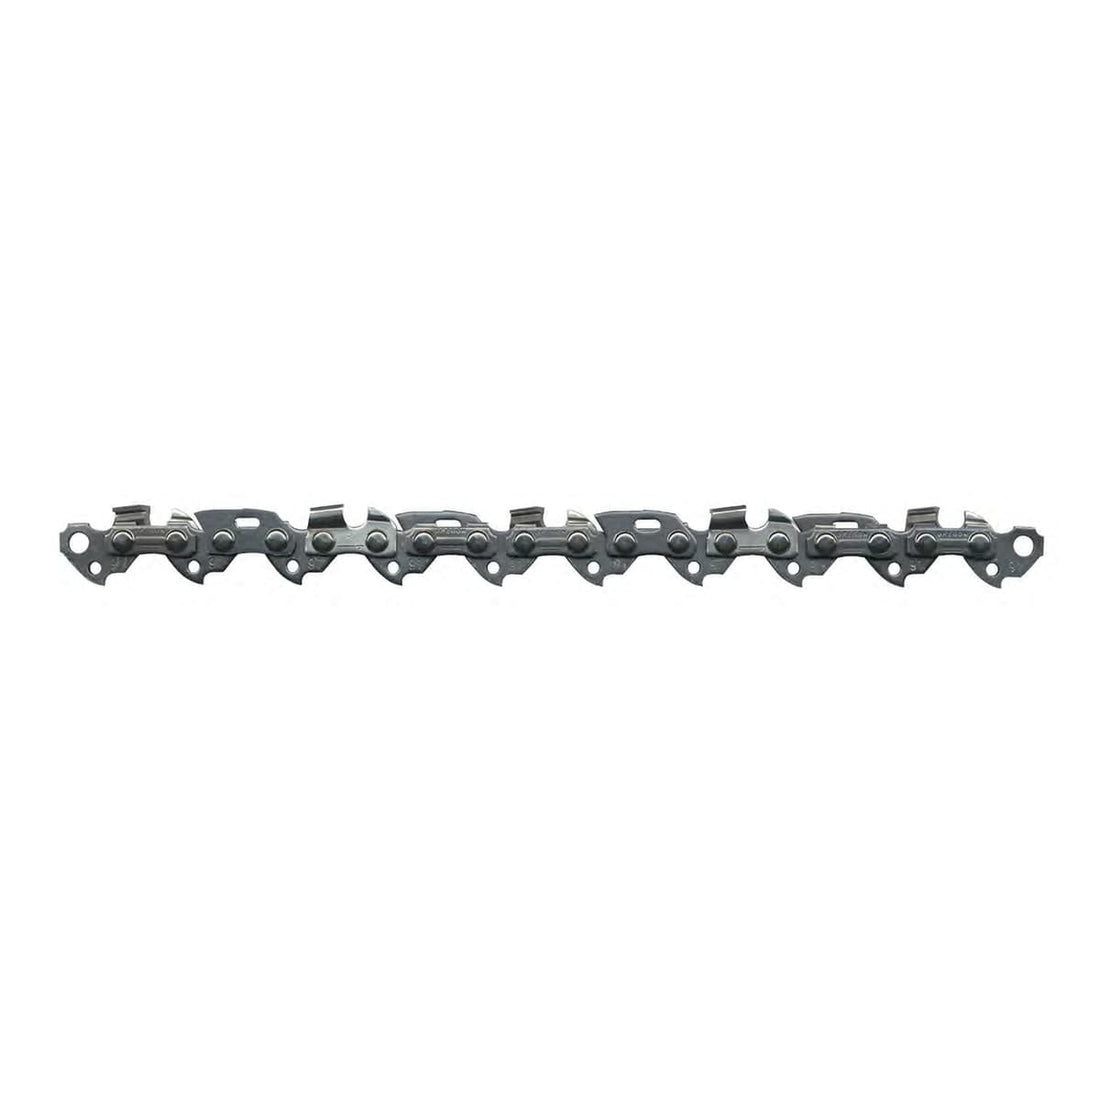 REPLACEMENT CHAIN FOR D91P-052E OREGON CHAINSAW - best price from Maltashopper.com BR500311135